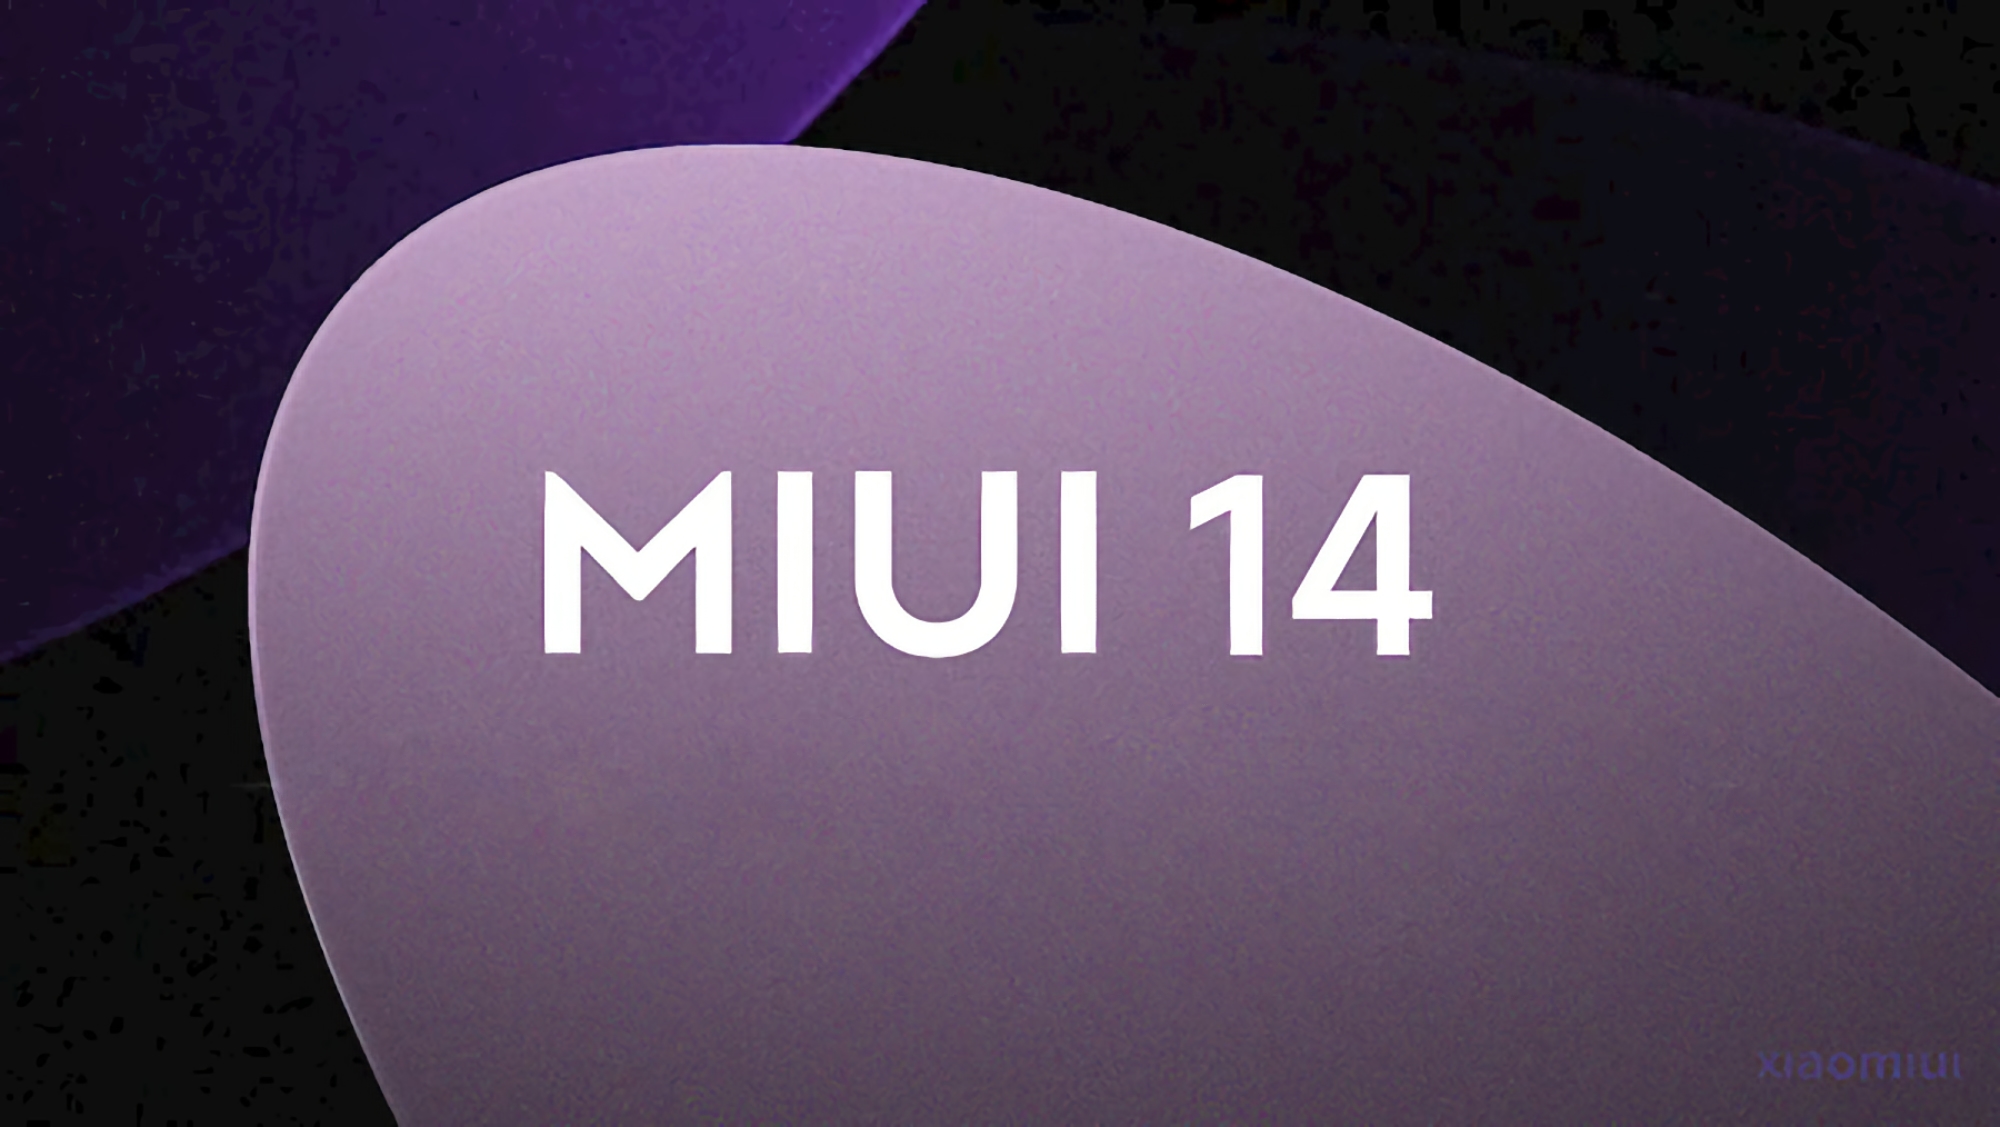 MIUI 14 shell screenshots have surfaced online